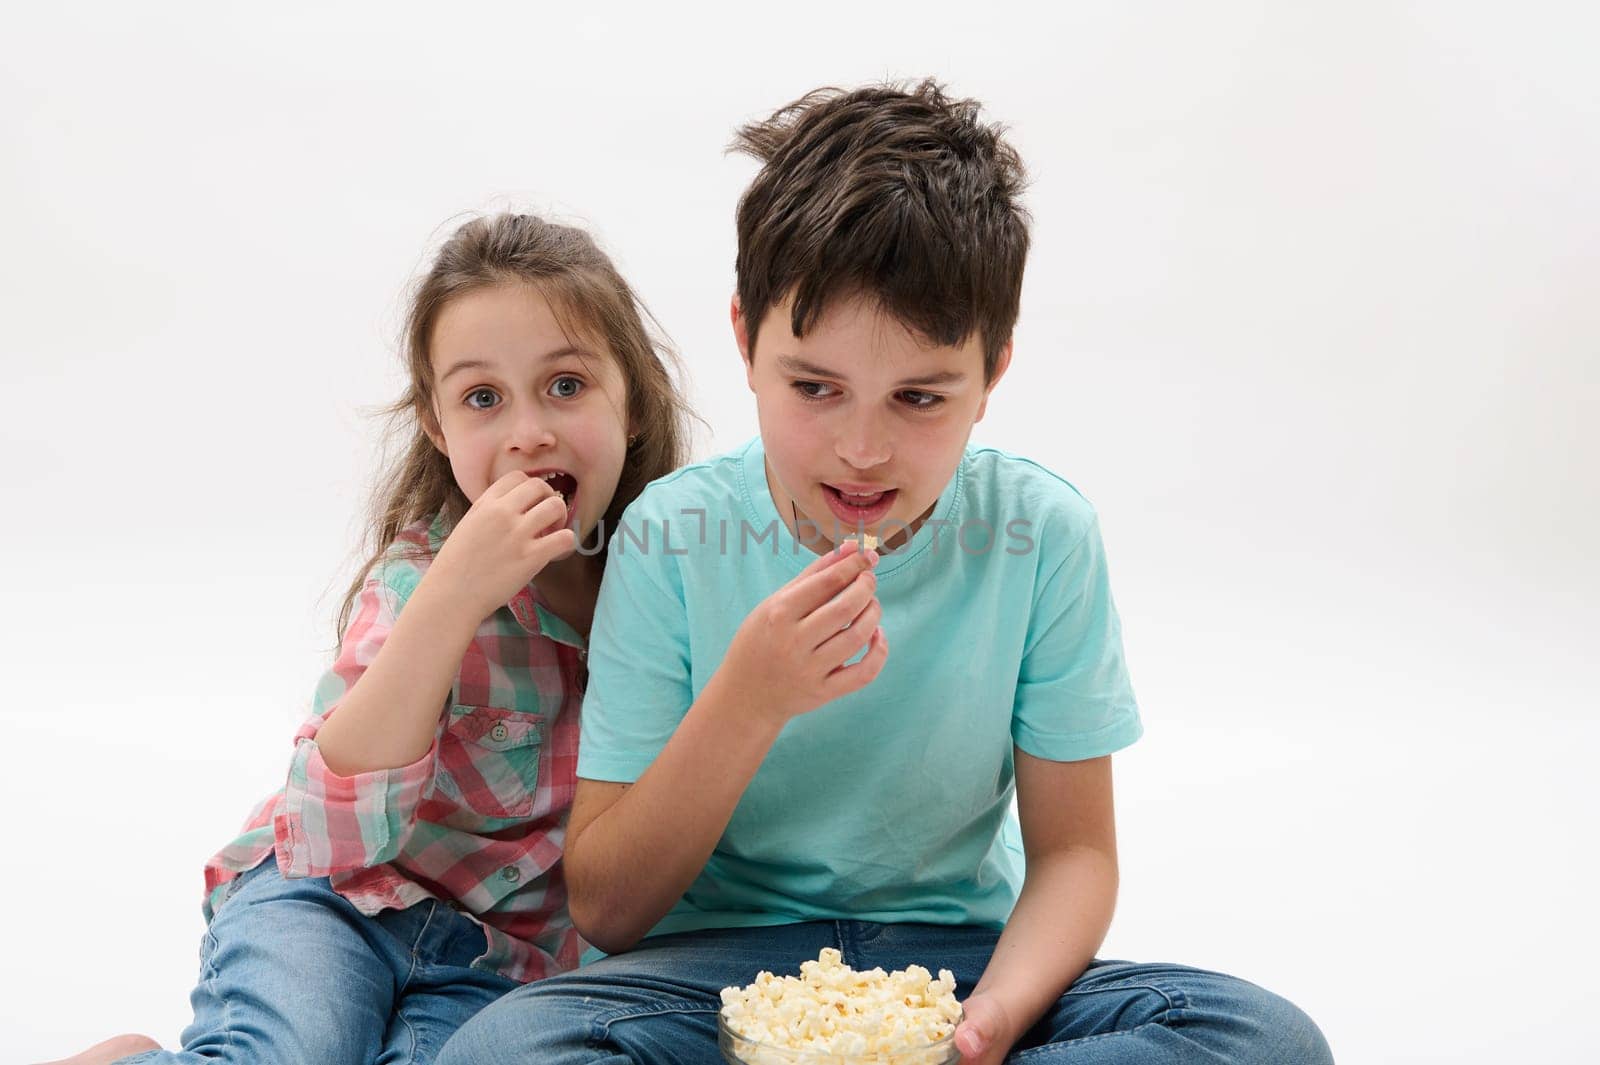 Happy kids, boy and girl eating popcorn, watching movie, smiling looking at camera, isolated on white studio background by artgf